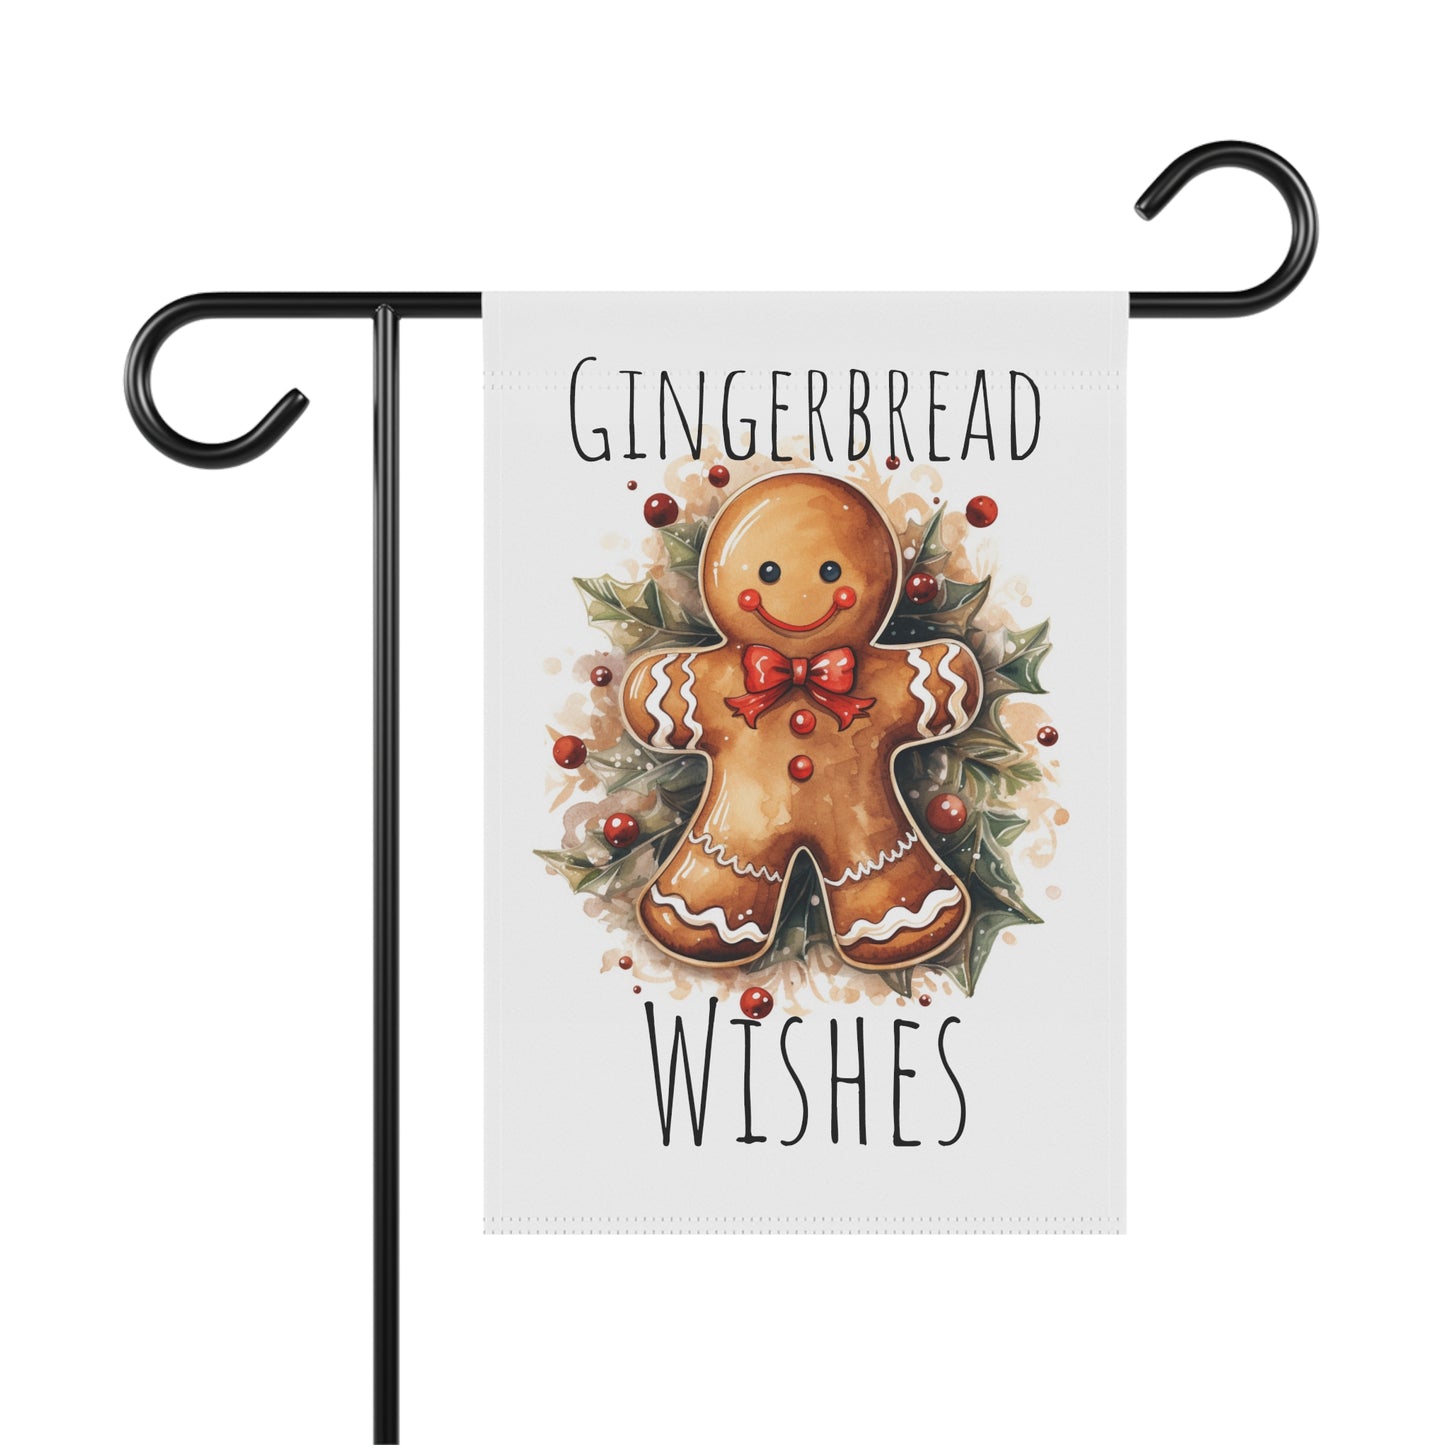 Gingerbread Wishes Garden & House Banner